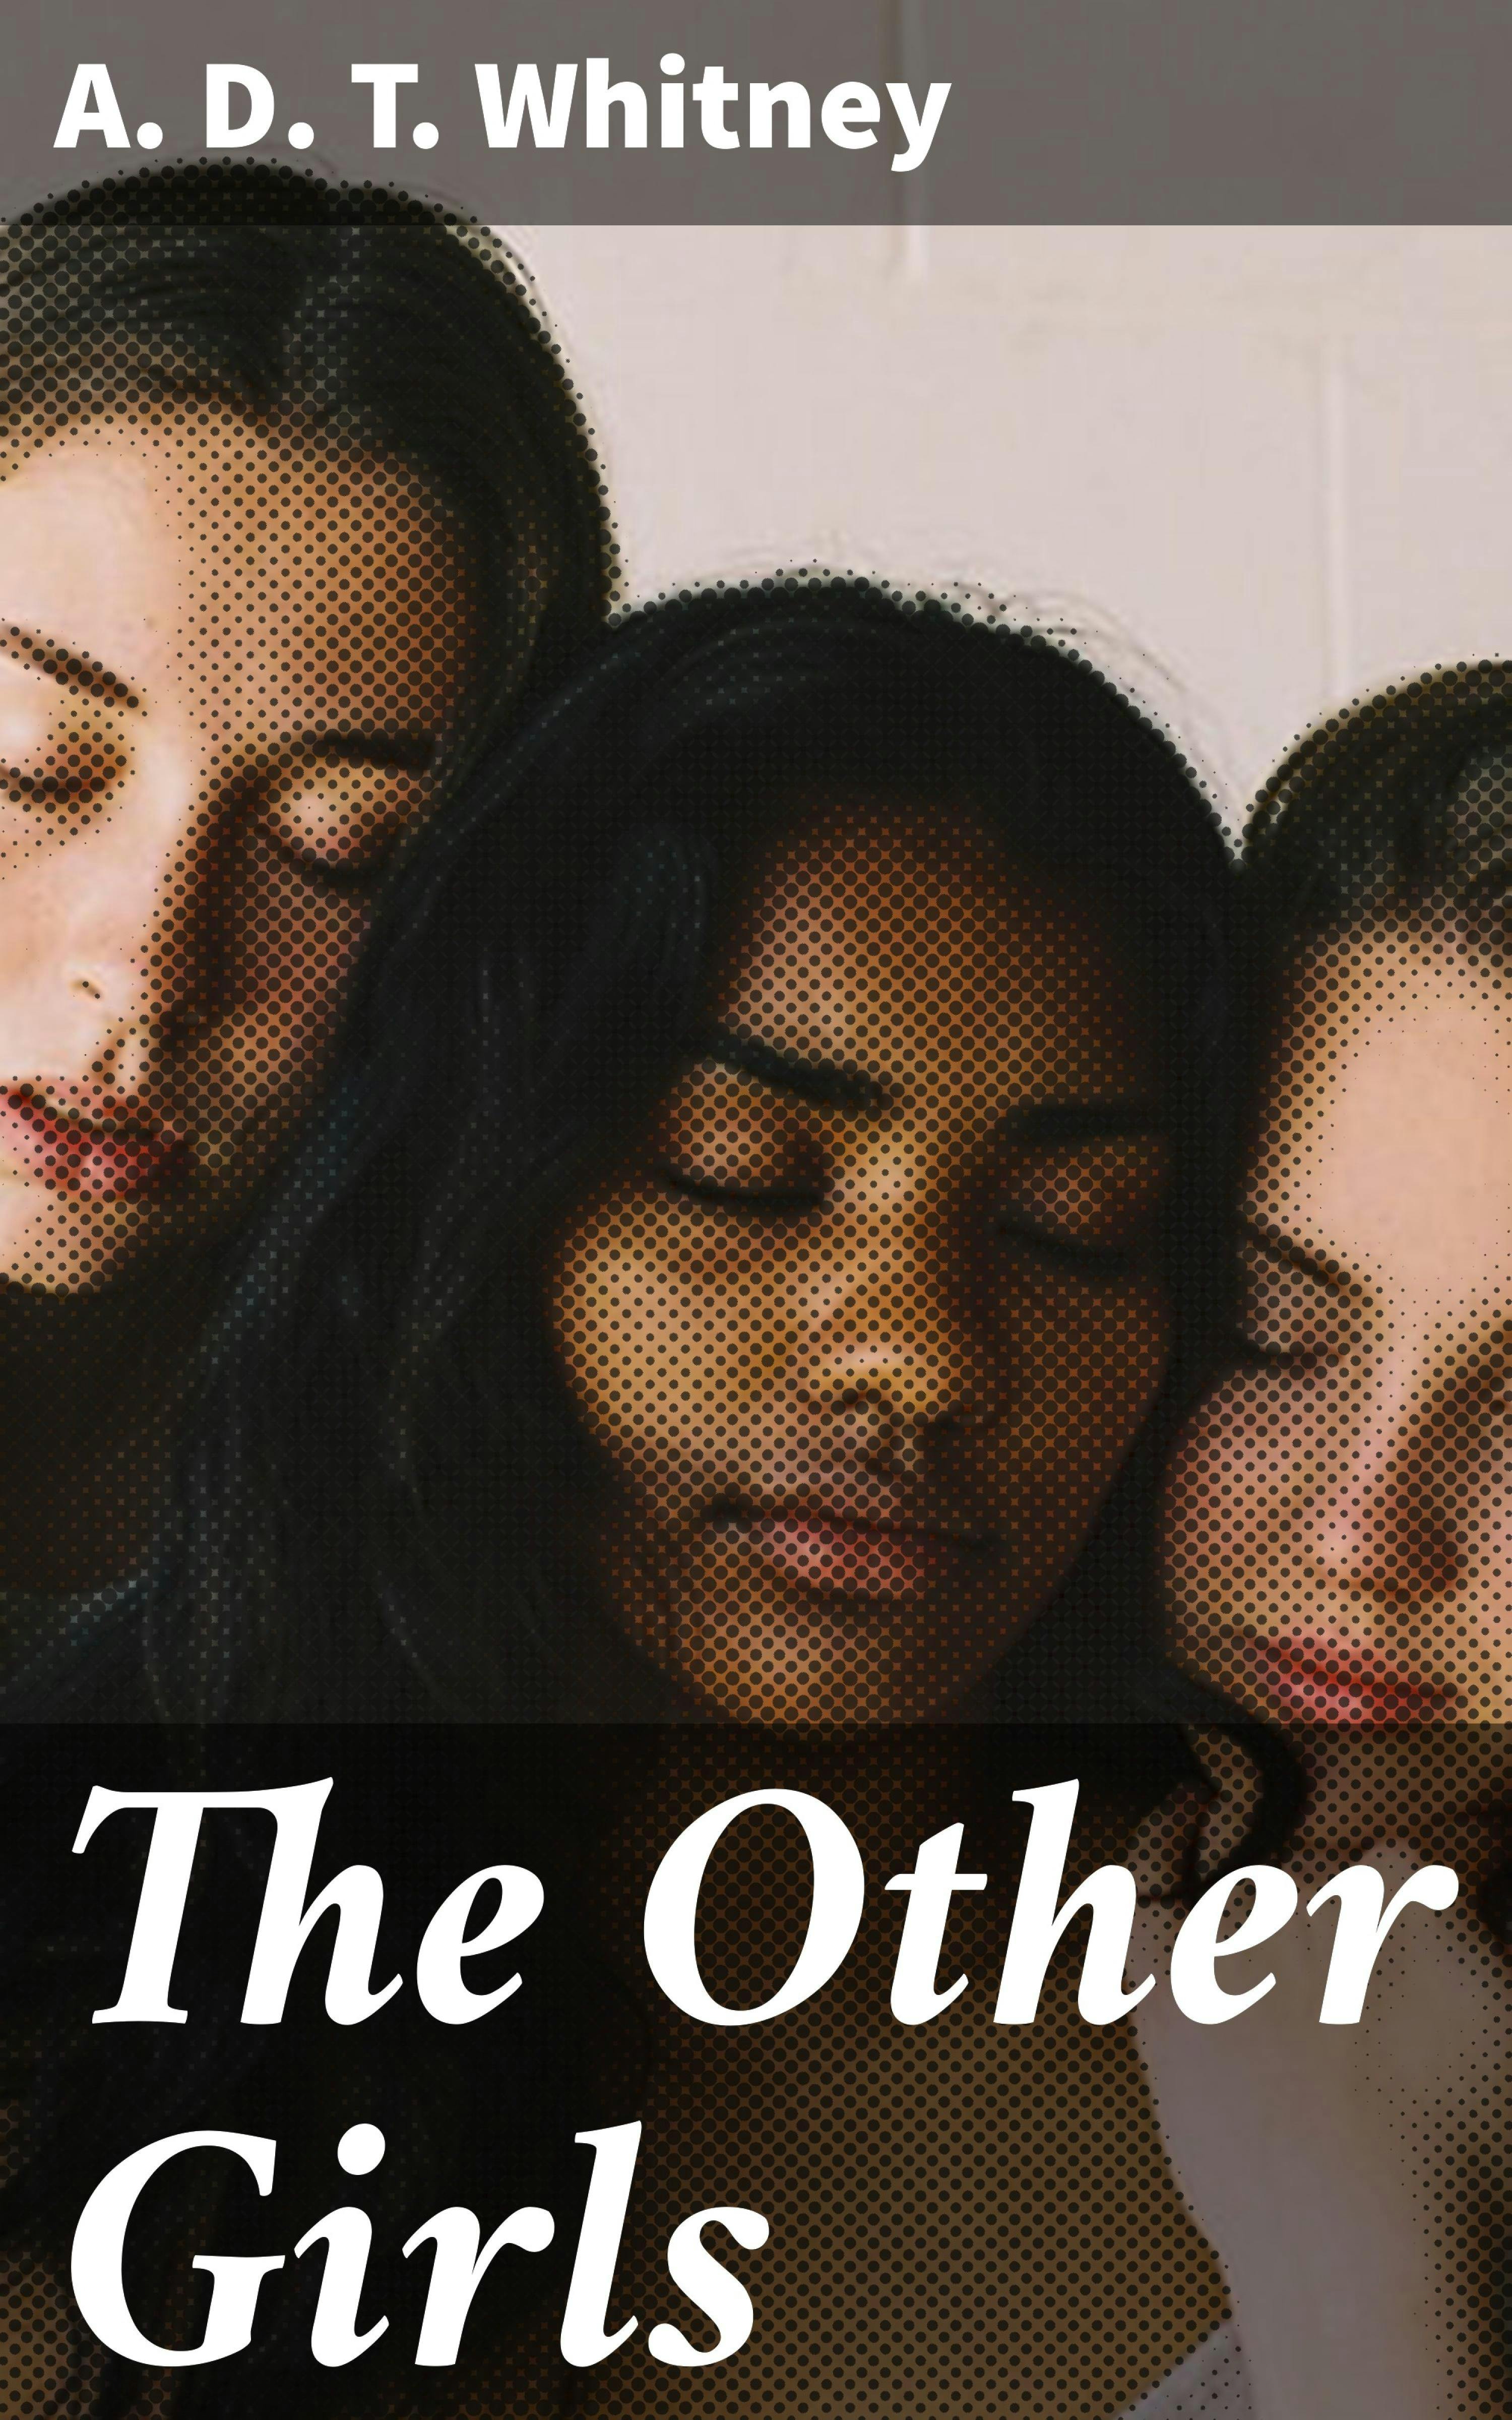 The Other Girls - A. D. T. Whitney